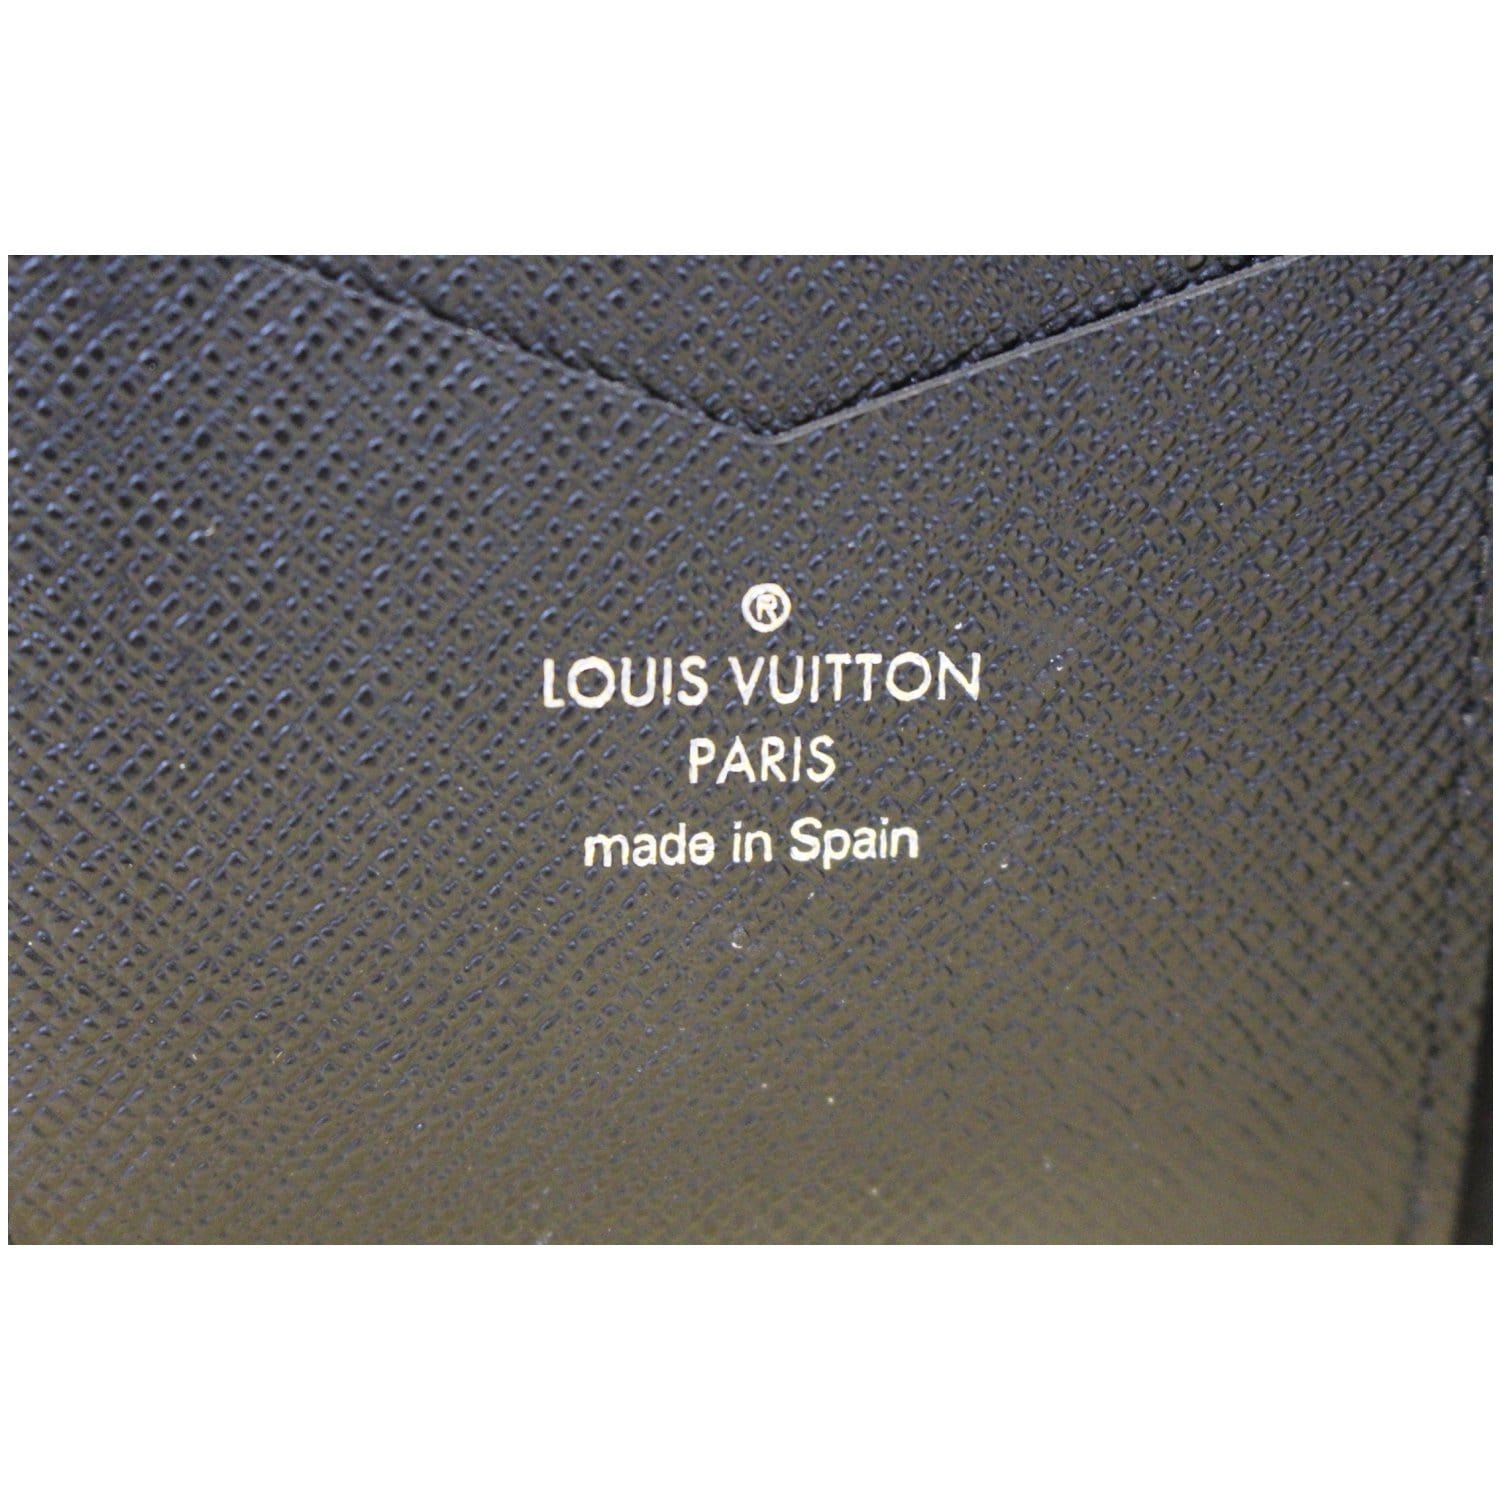 LOUIS VUITTON LV Case For iPhone MADE IN FRANCE. Original Louis